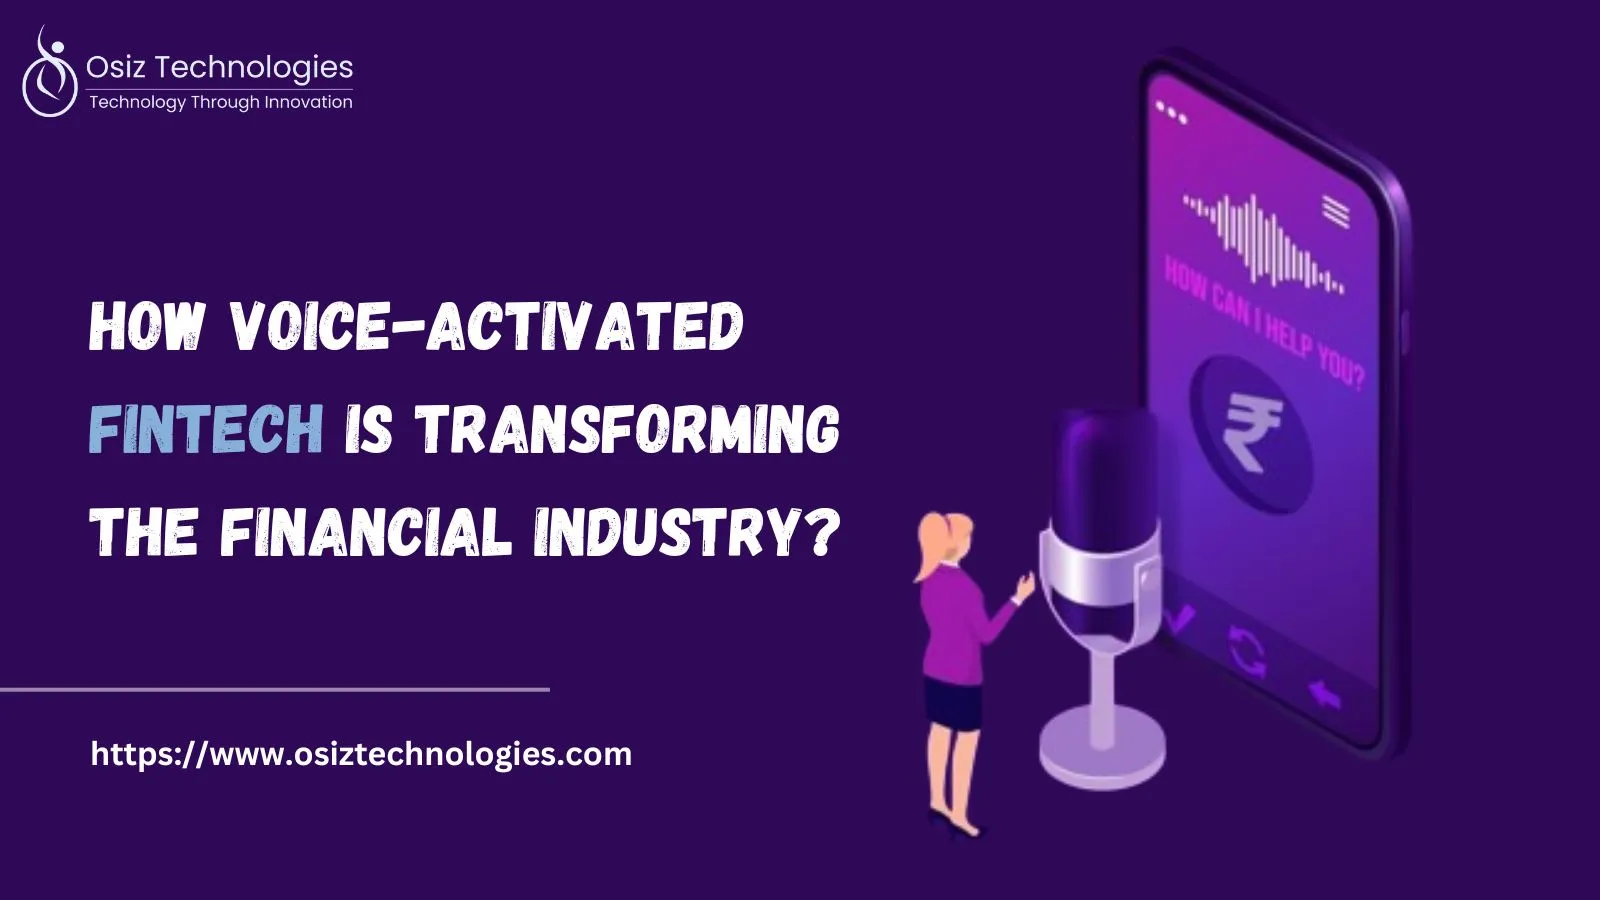 How Voice-Activated Fintech is Transforming the Financial Industry?